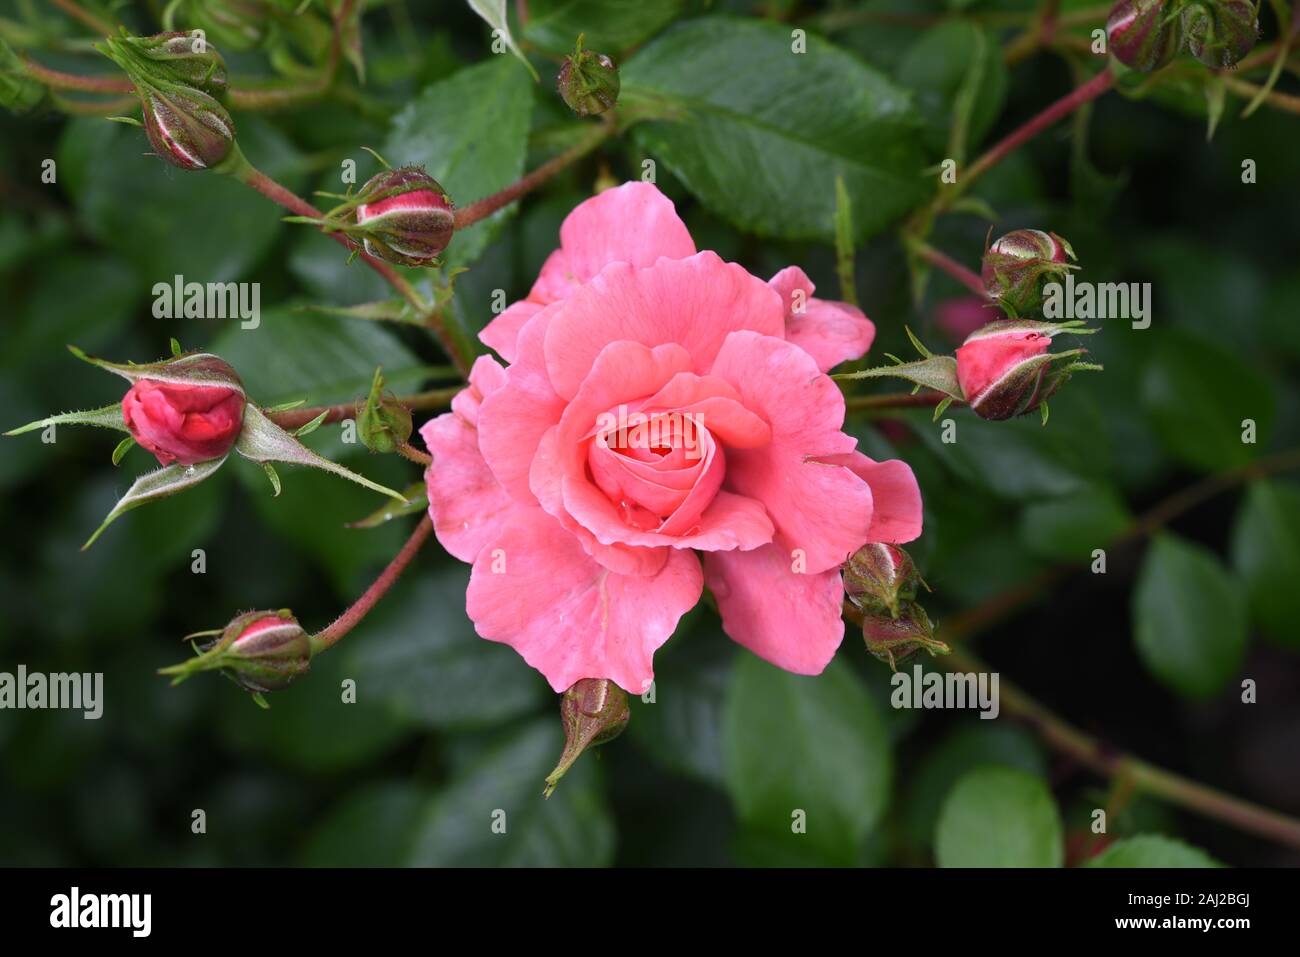 Beautiful flower head of Kordes pink rose Bad Birnbach with buds in a garden with dark green background Stock Photo